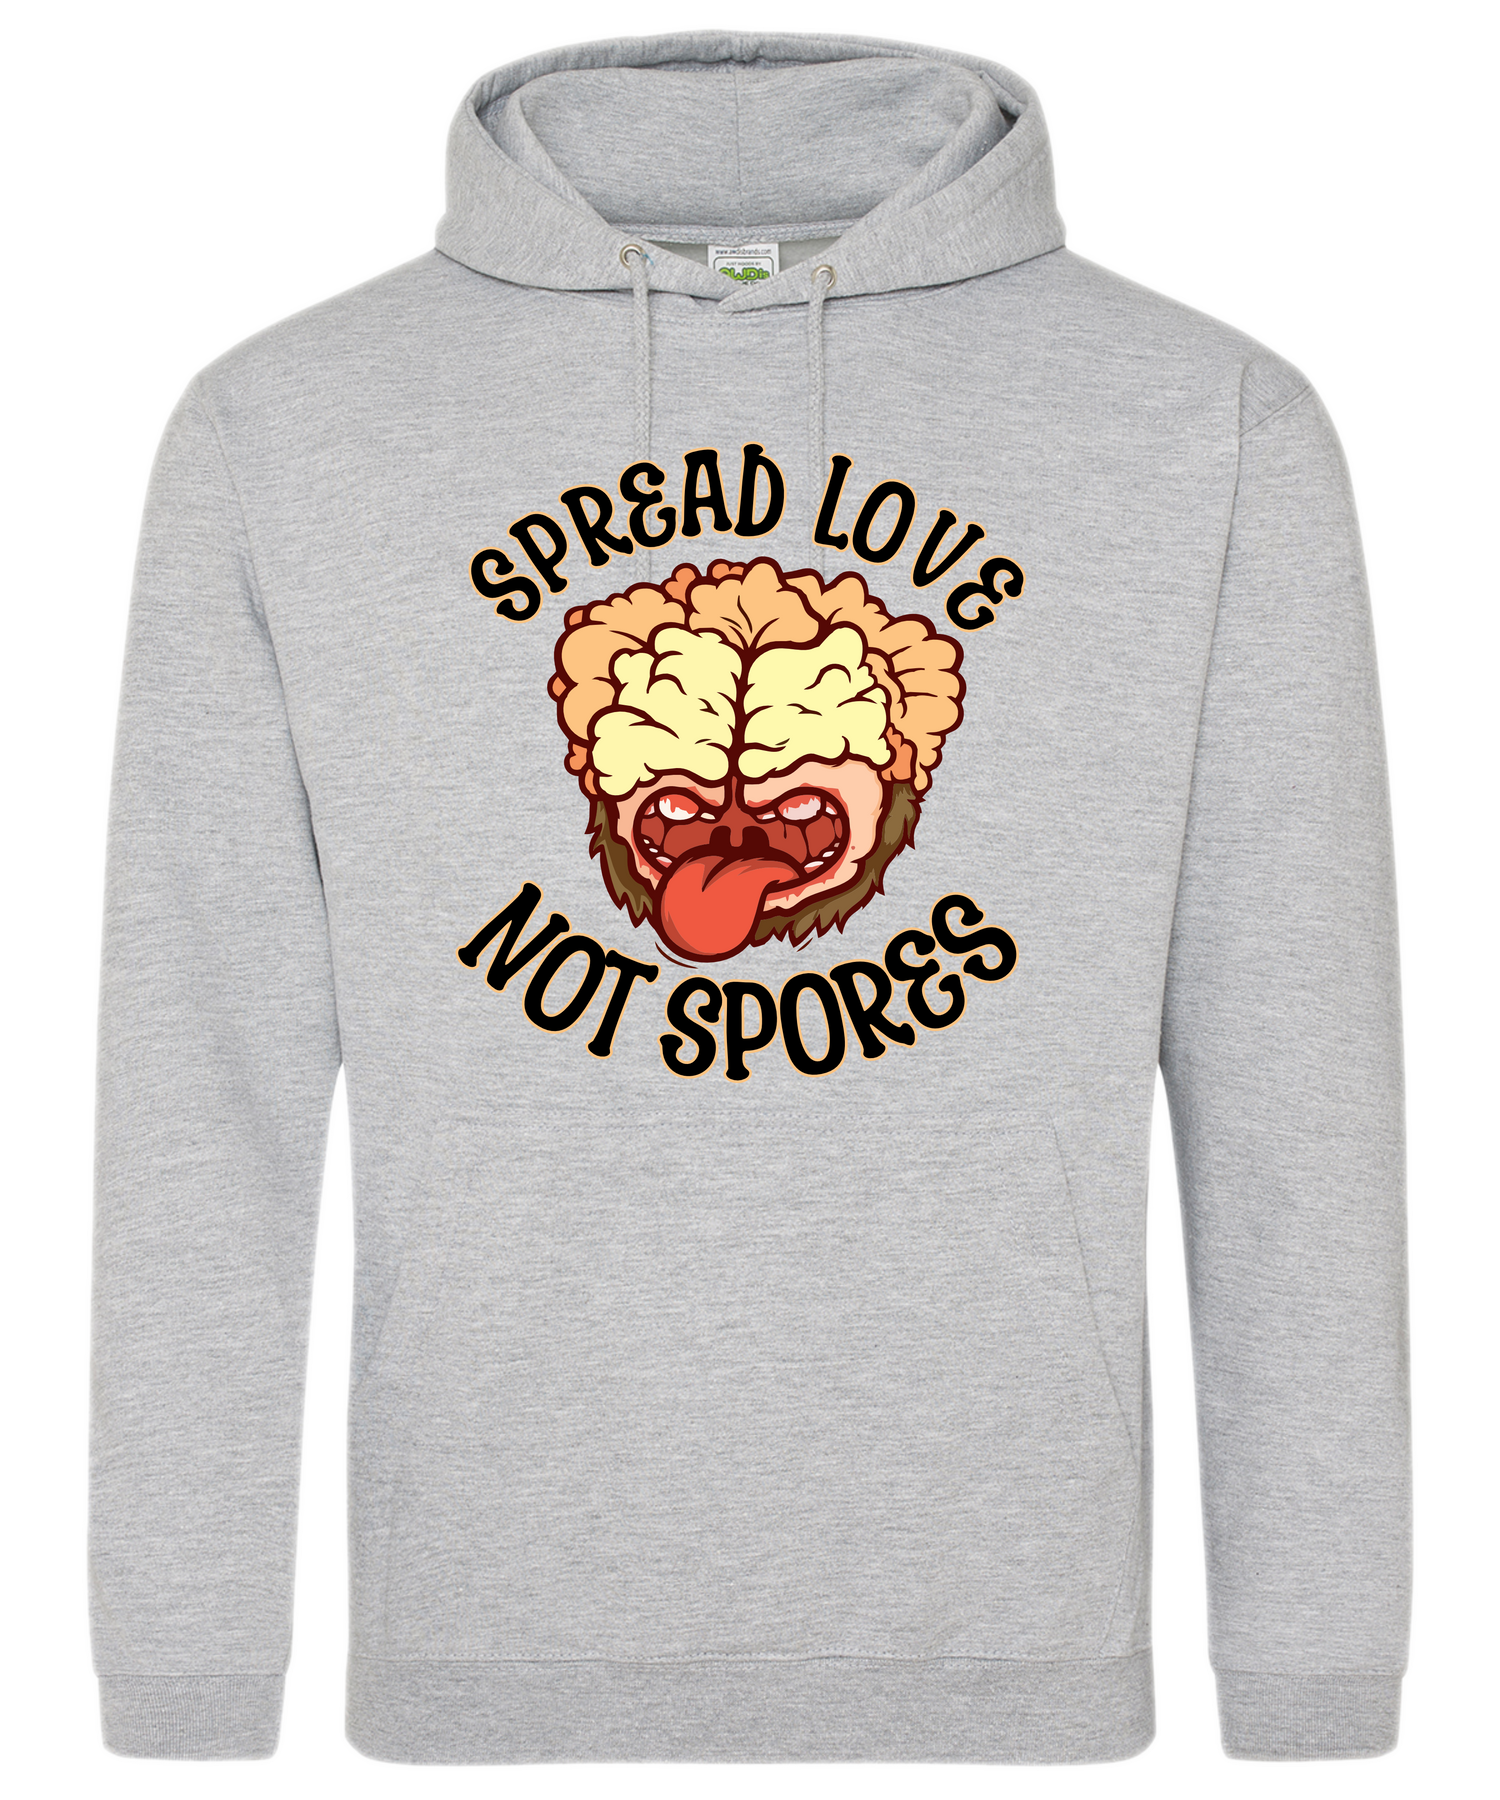 printed hoodie with spread love not spores on the front